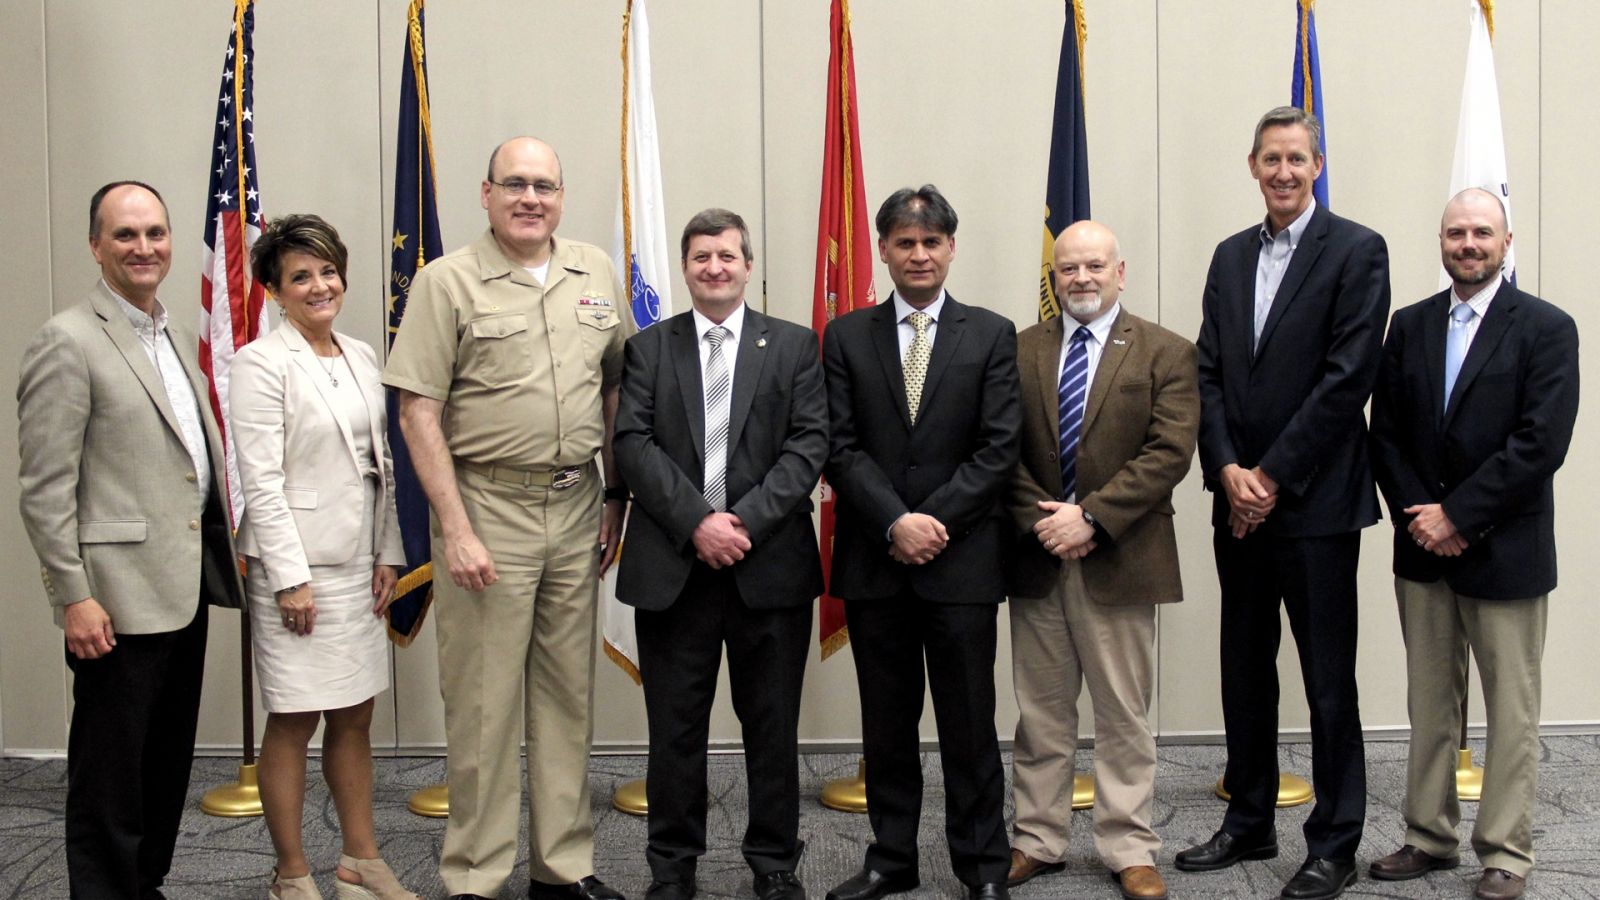 NSWC Crane formally announced its Expeditionary Warfare Systems Engineering Master’s Degree program at a reception on Thursday, May 17th, at the WestGate Academy Conference and Training Center in Crane, Indiana. (Photo by NSWC Crane Corporate Communications)